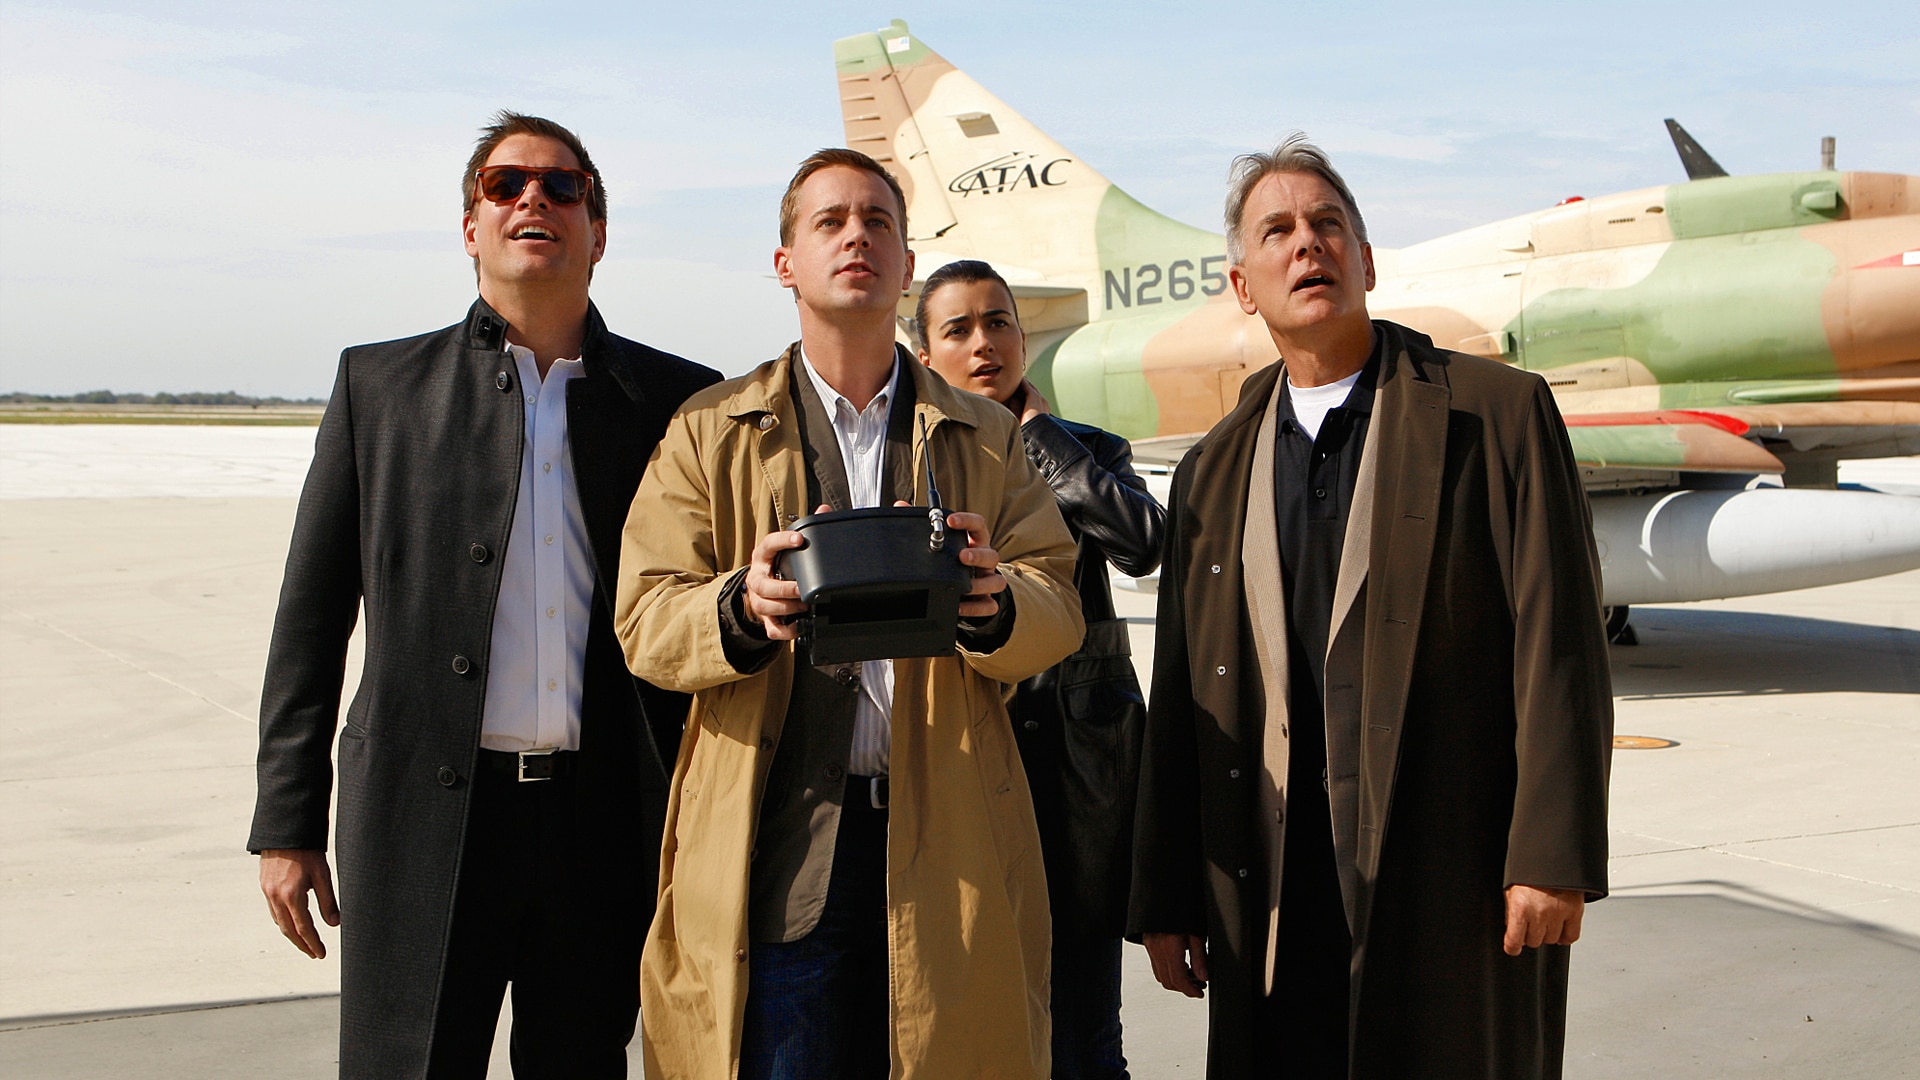 Watch Ignition (Season 7, Episode 11) of NCIS or get episode details on USA...